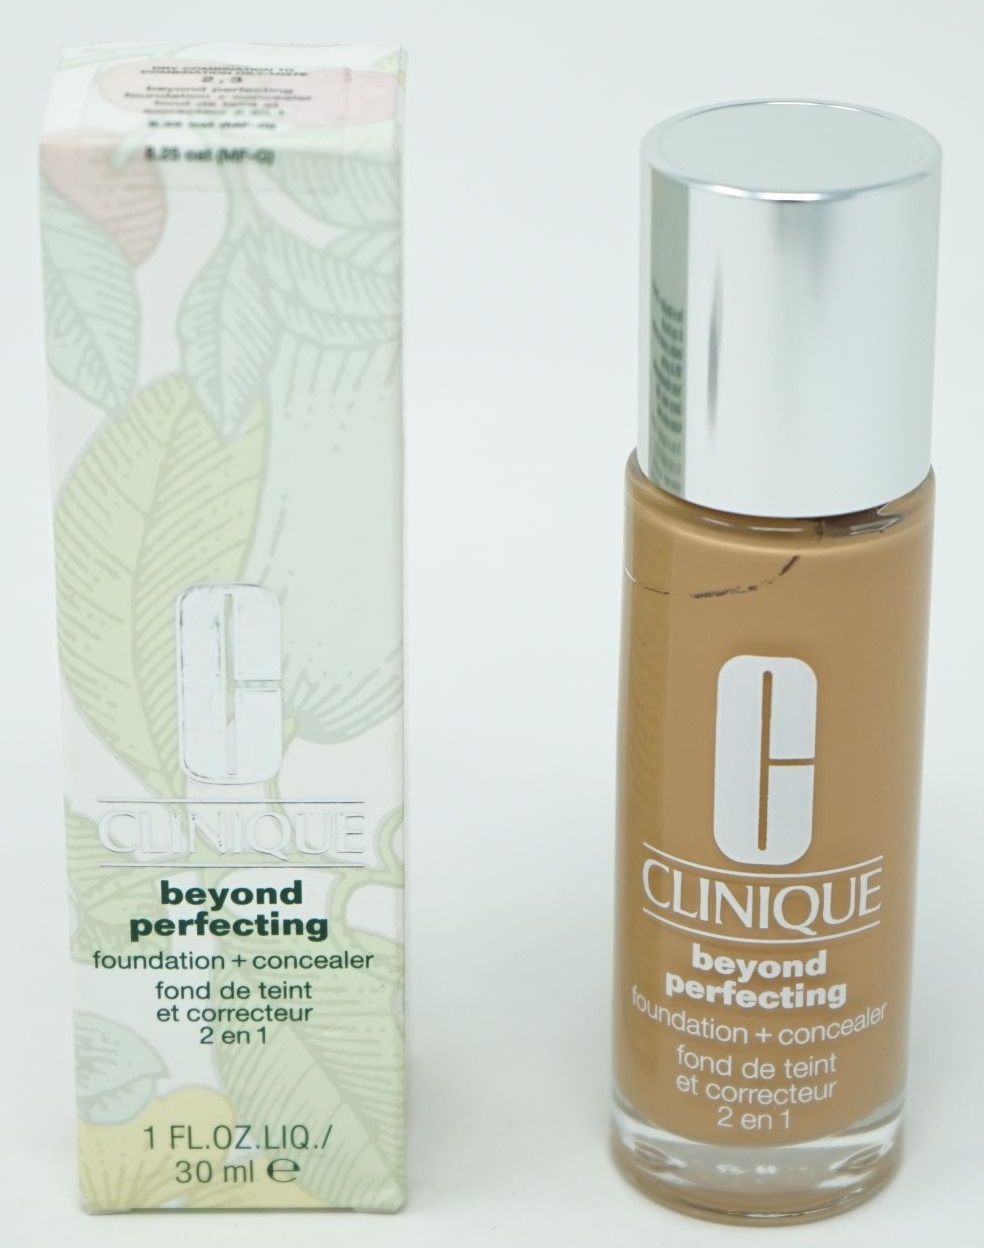 Clinique Beyond Perfecting foundation concealer 8,25 oat (MF-G)